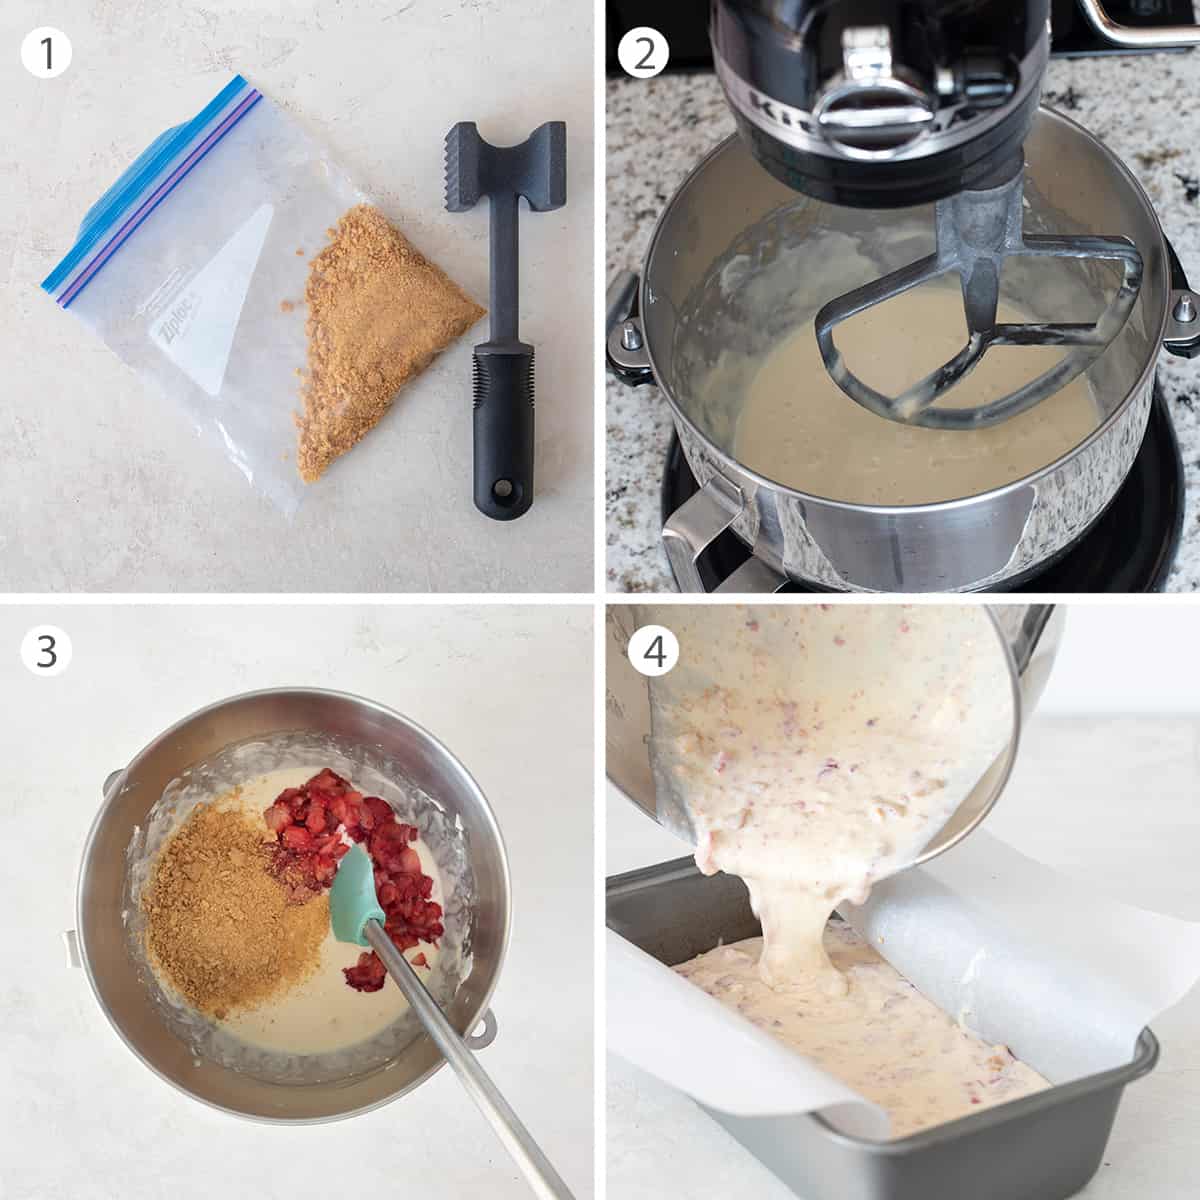 Collage of instructions for making no churn ice cream including crushed graham crackers, ingredients in the mixer, and pouring the ice cream for freezing.